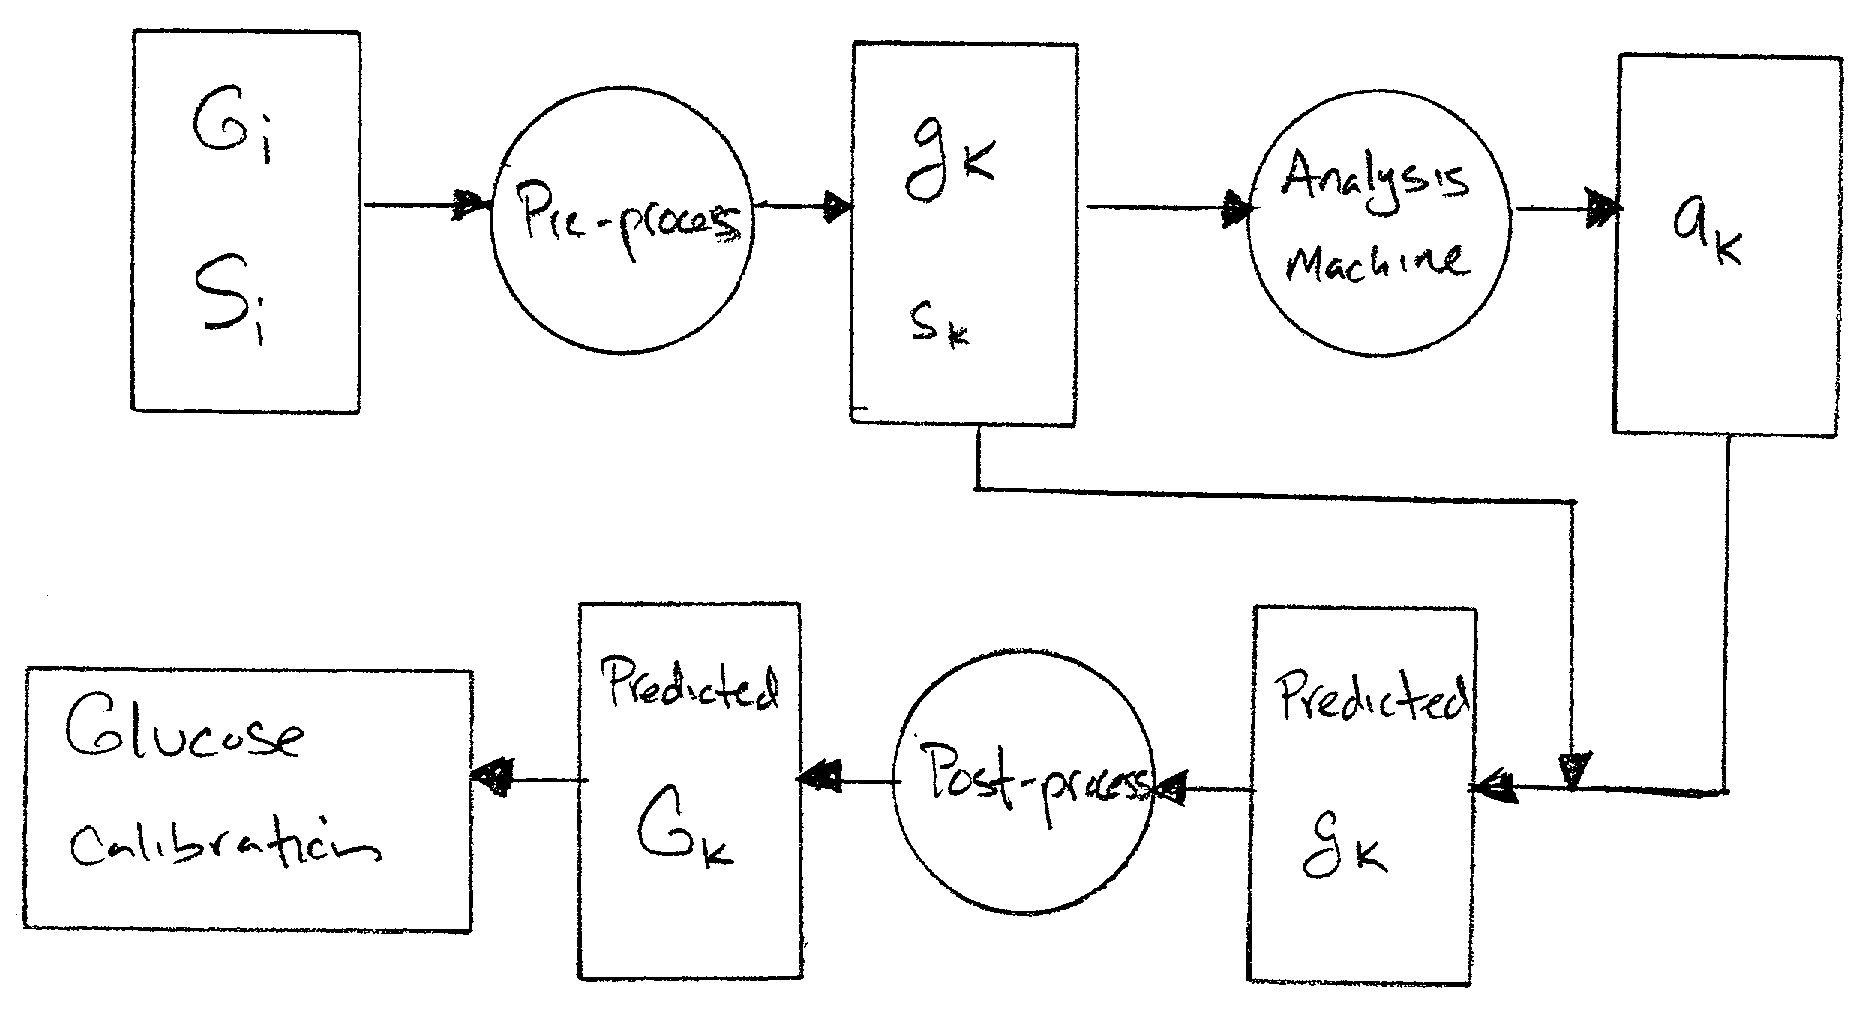 Pre- and post-processing of spectral data for calibration using mutivariate analysis techniques